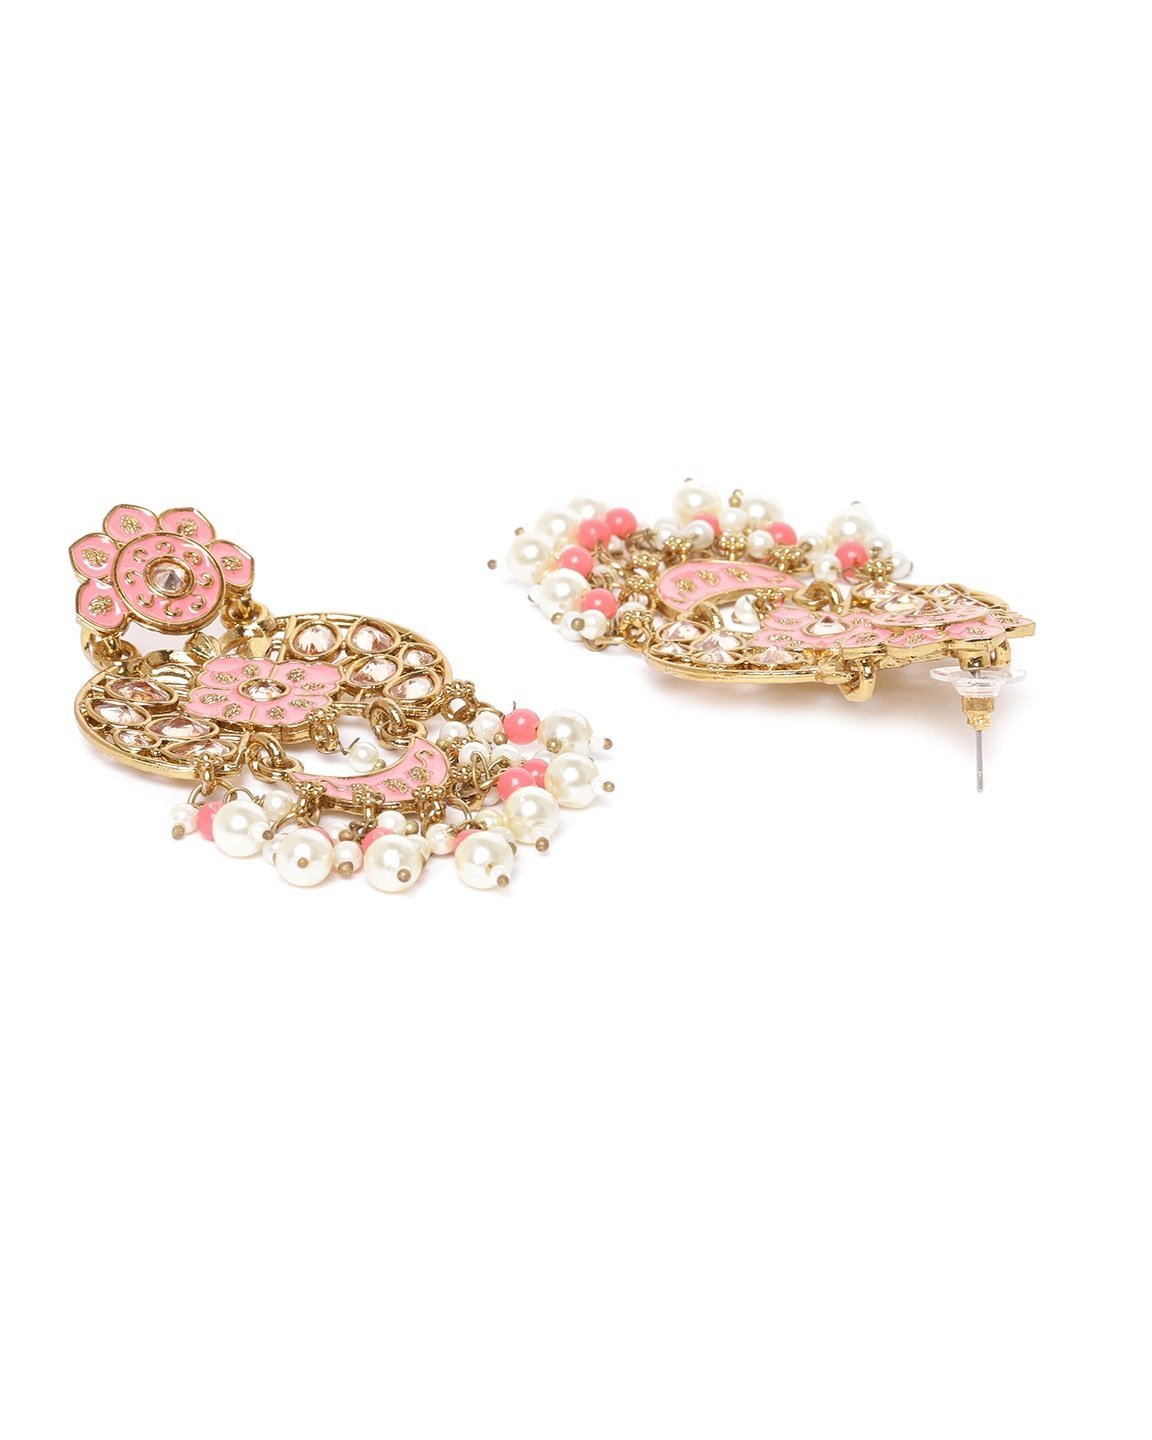 Women's Gold-Plated Stone Studded Drop Earrings with Pearl Drop in Peach Color - Priyaasi